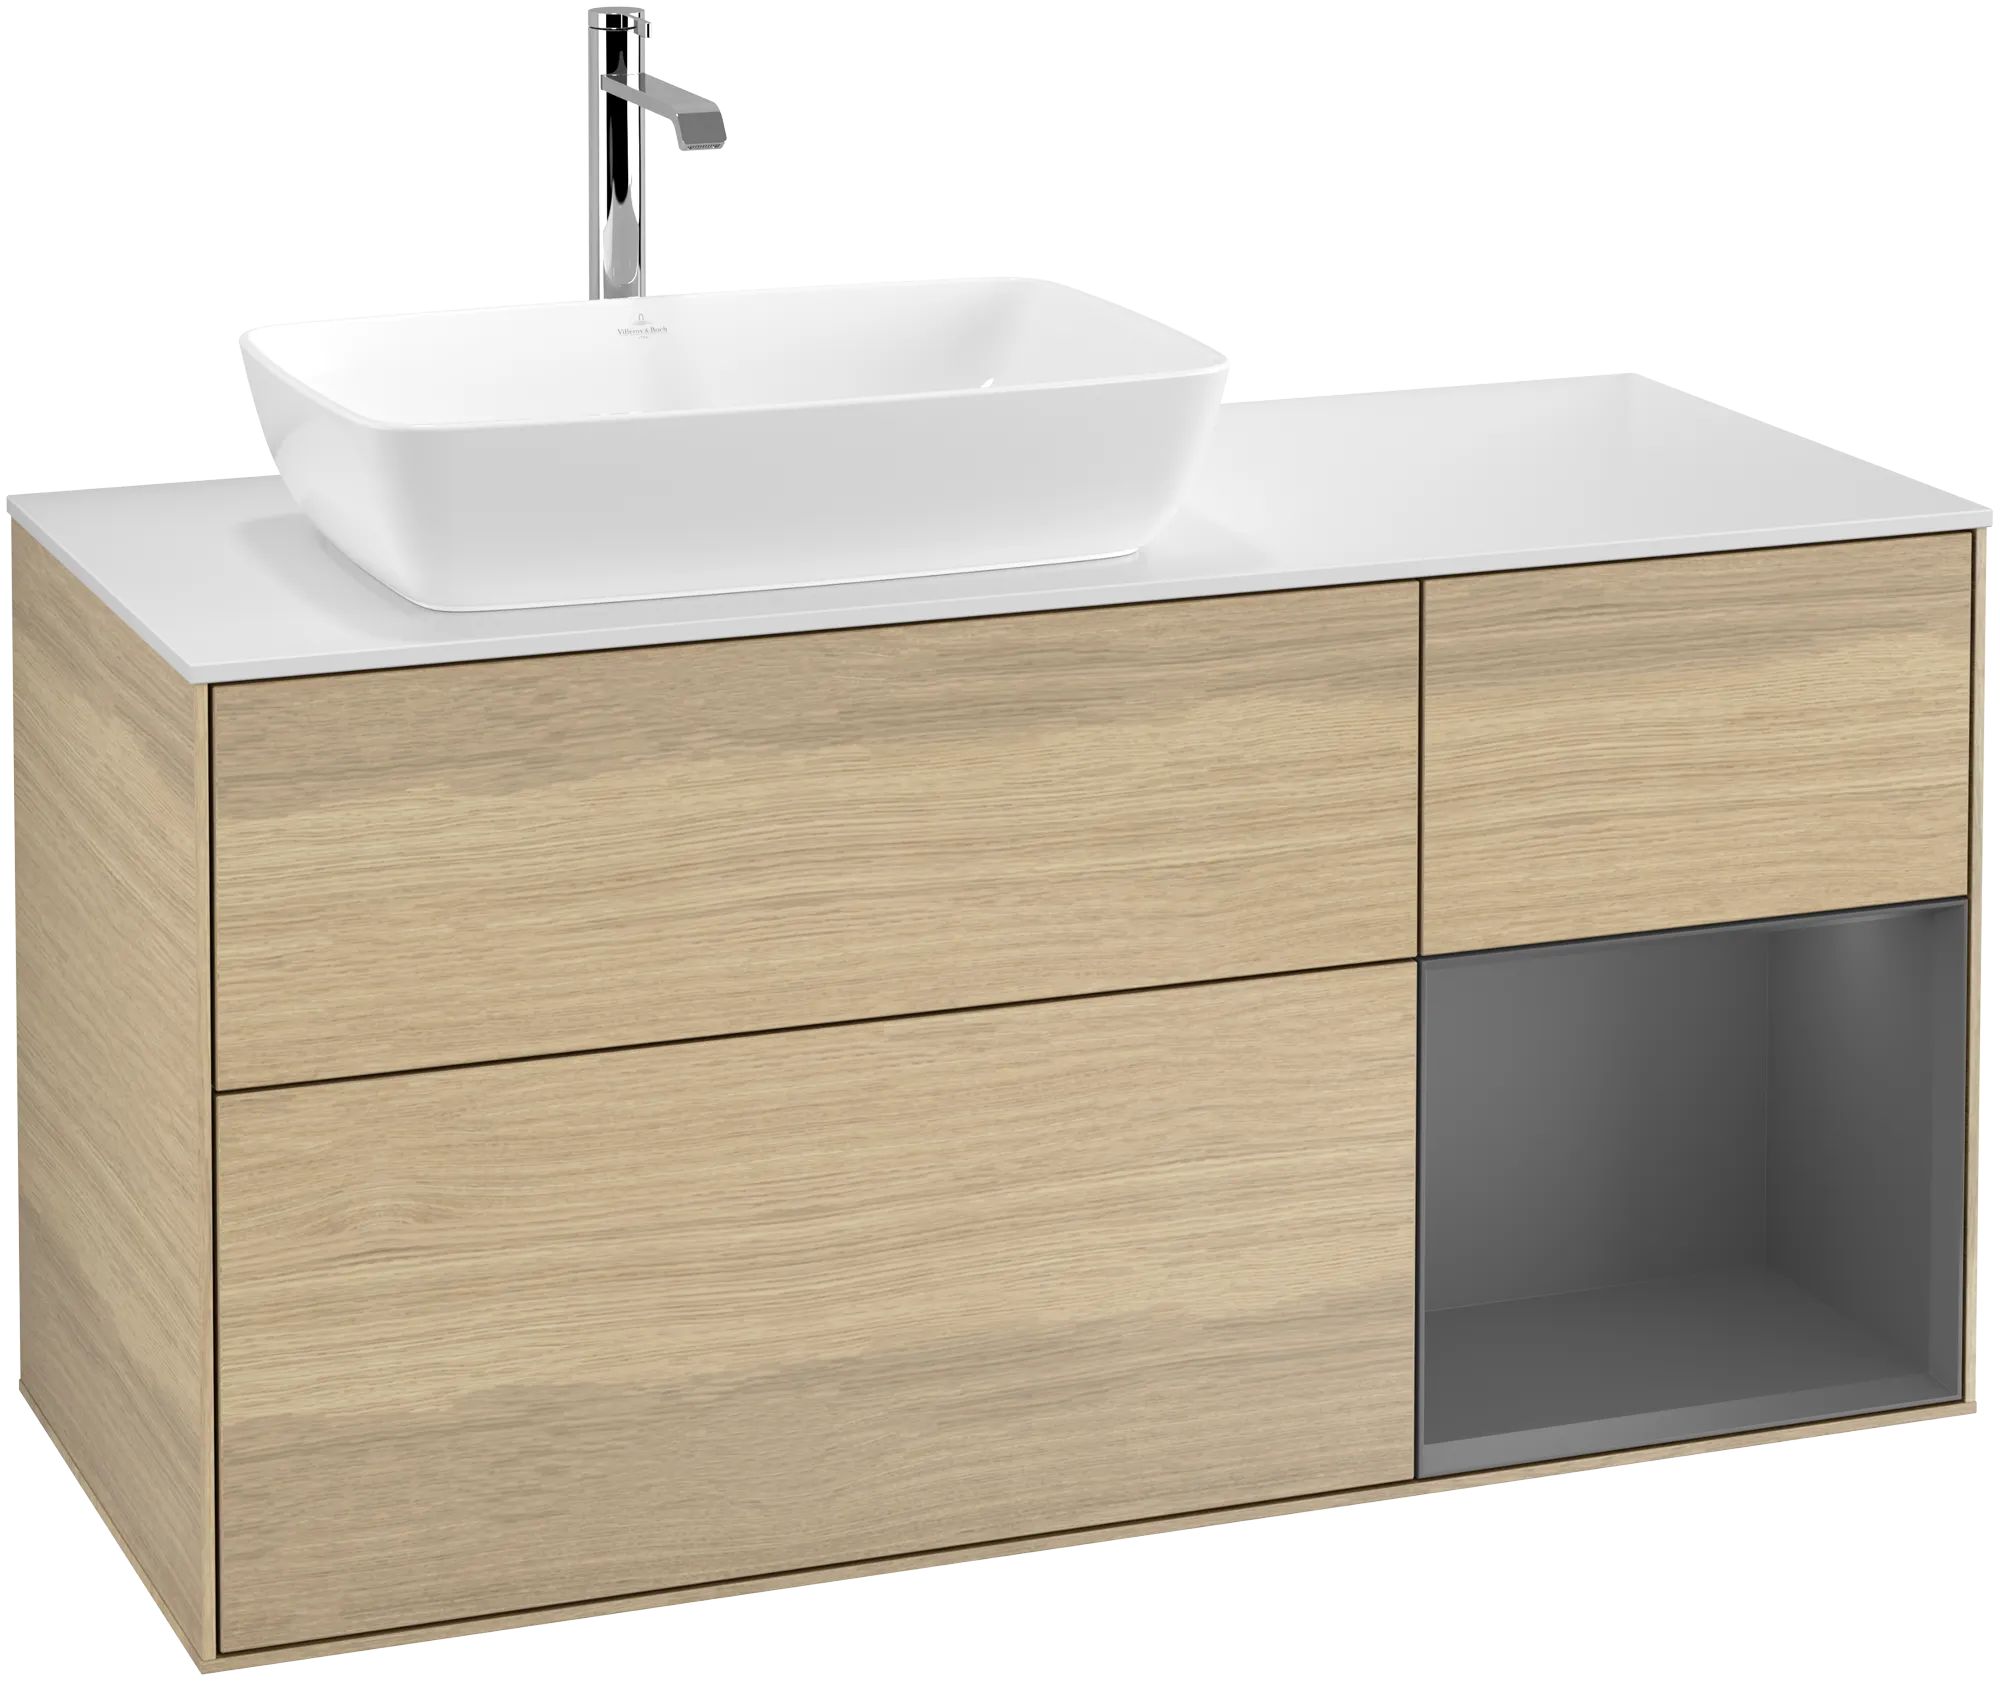 VILLEROY BOCH Finion Vanity unit, with lighting, 3 pull-out compartments, 1200 x 603 x 501 mm, Oak Veneer / Anthracite Matt Lacquer / Glass White Matt #G811GKPC resmi